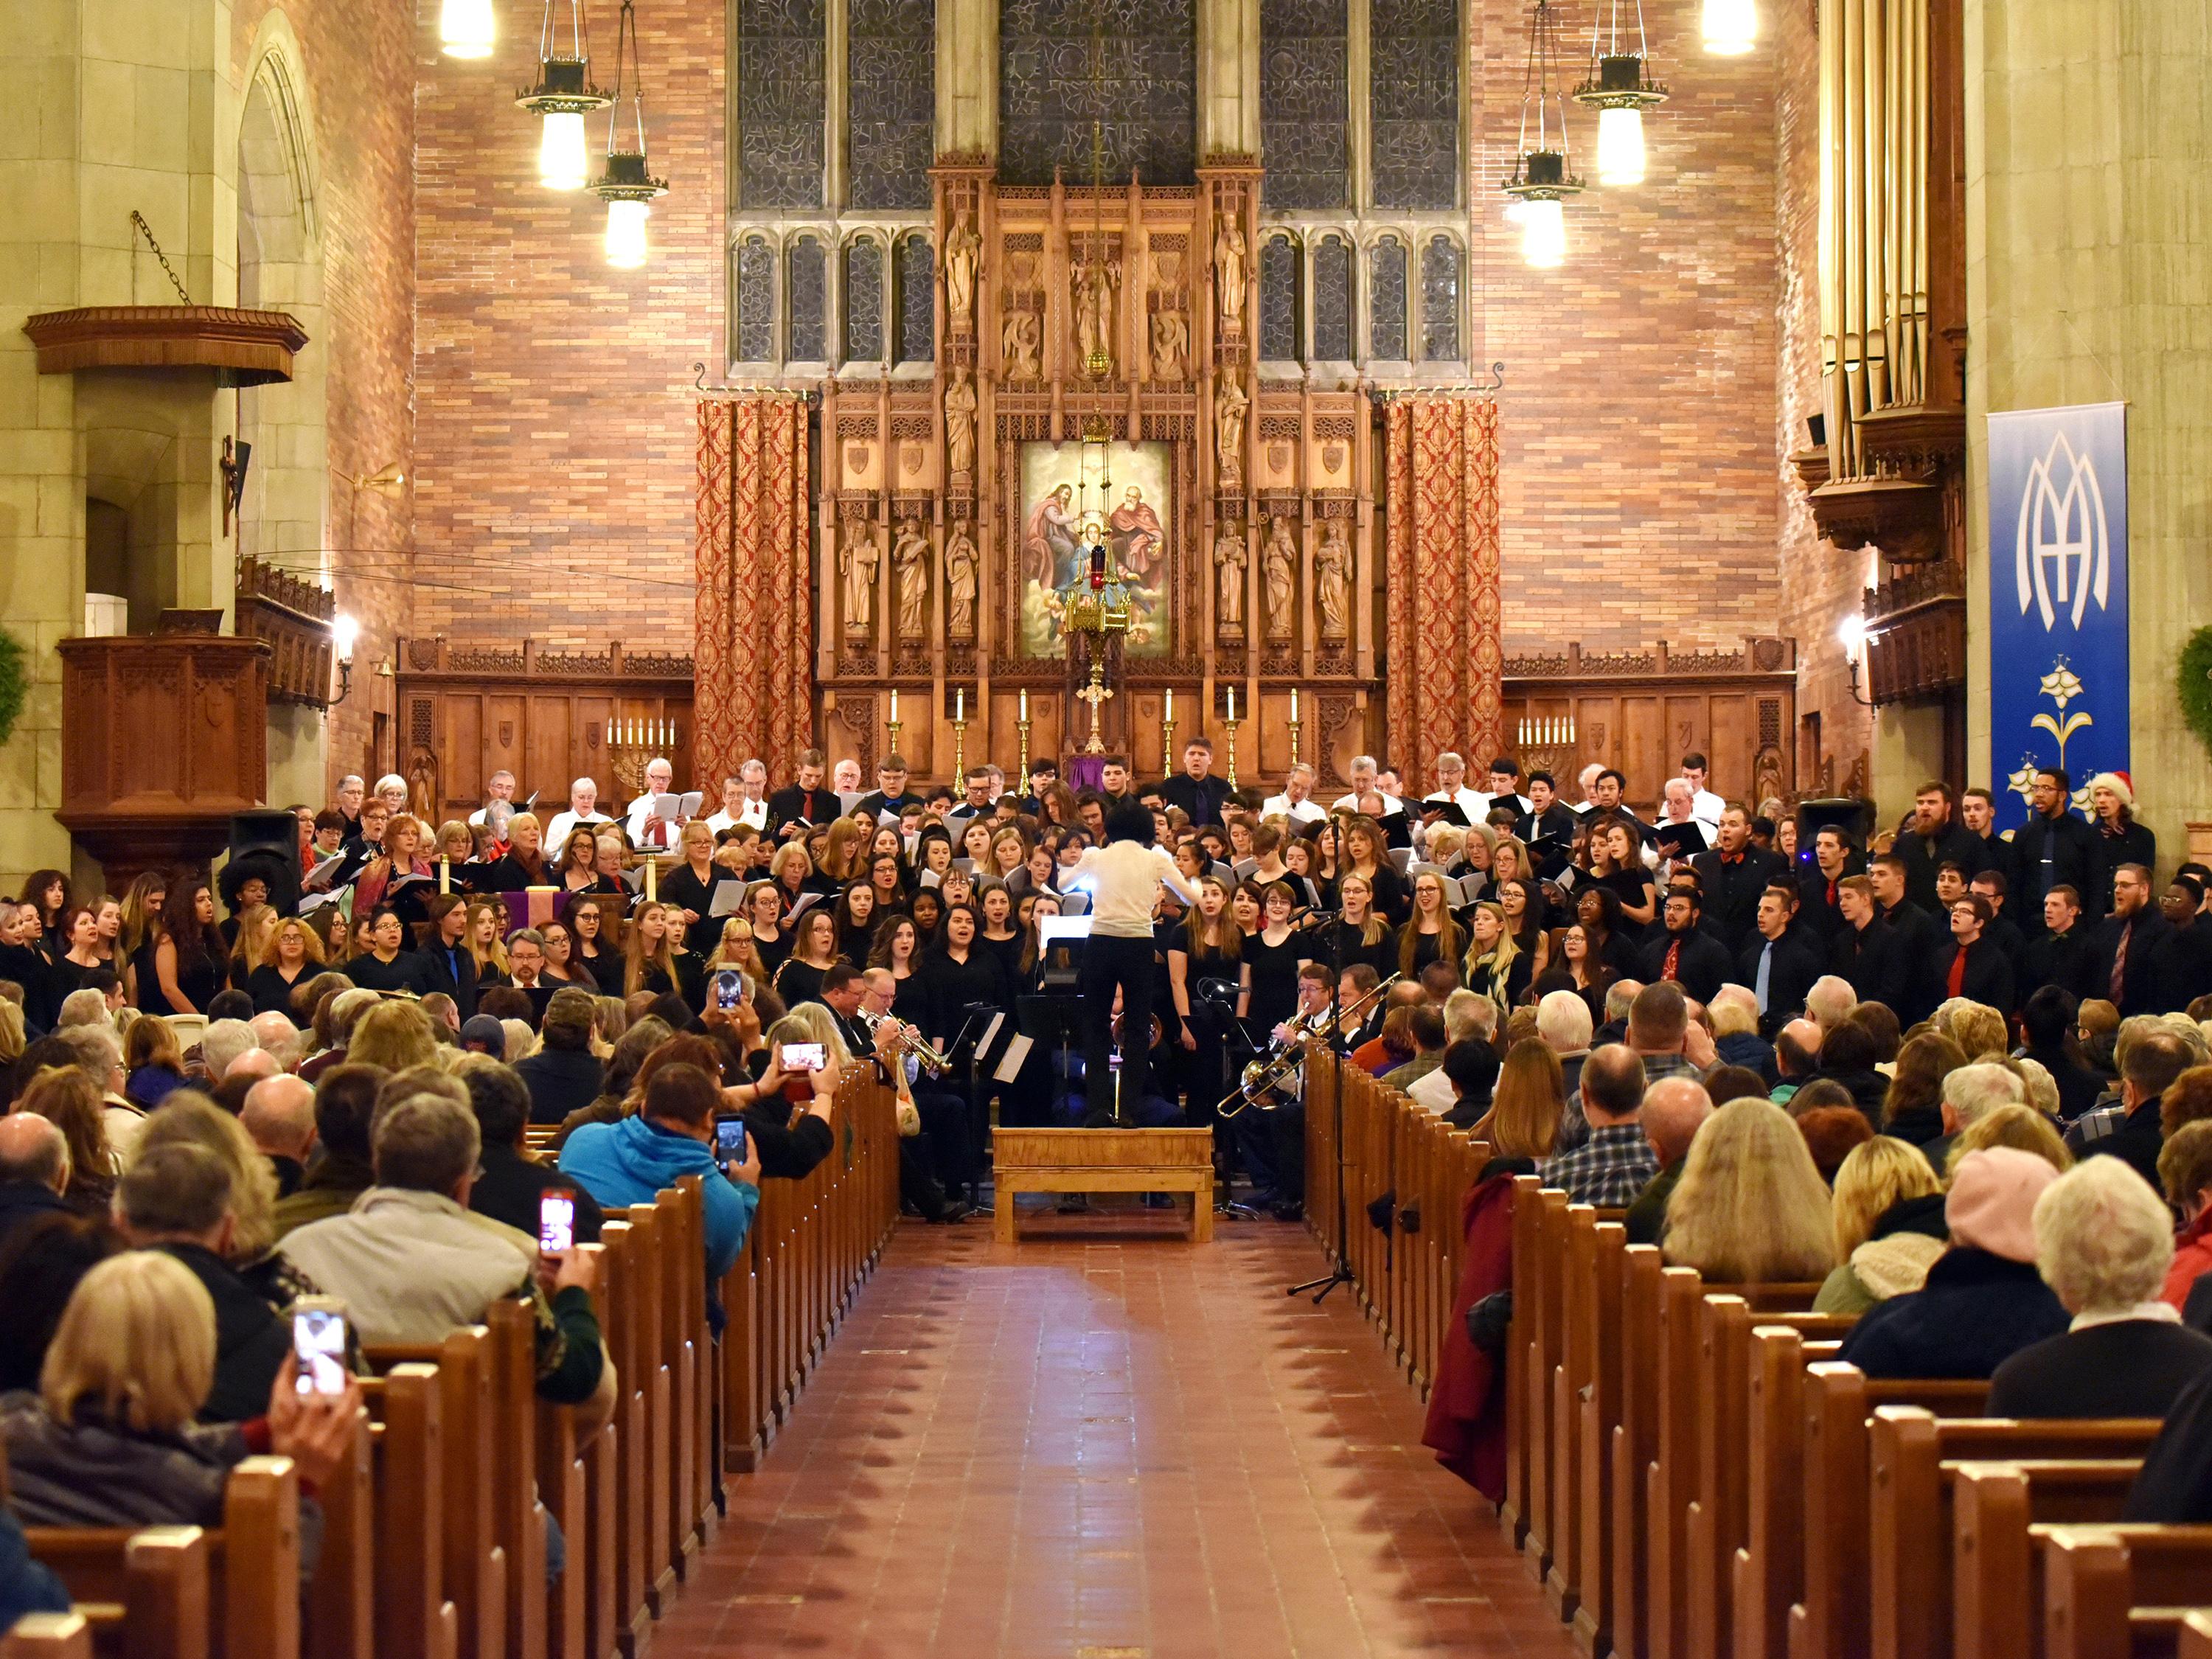 College, community musical groups perform in previous holiday concert